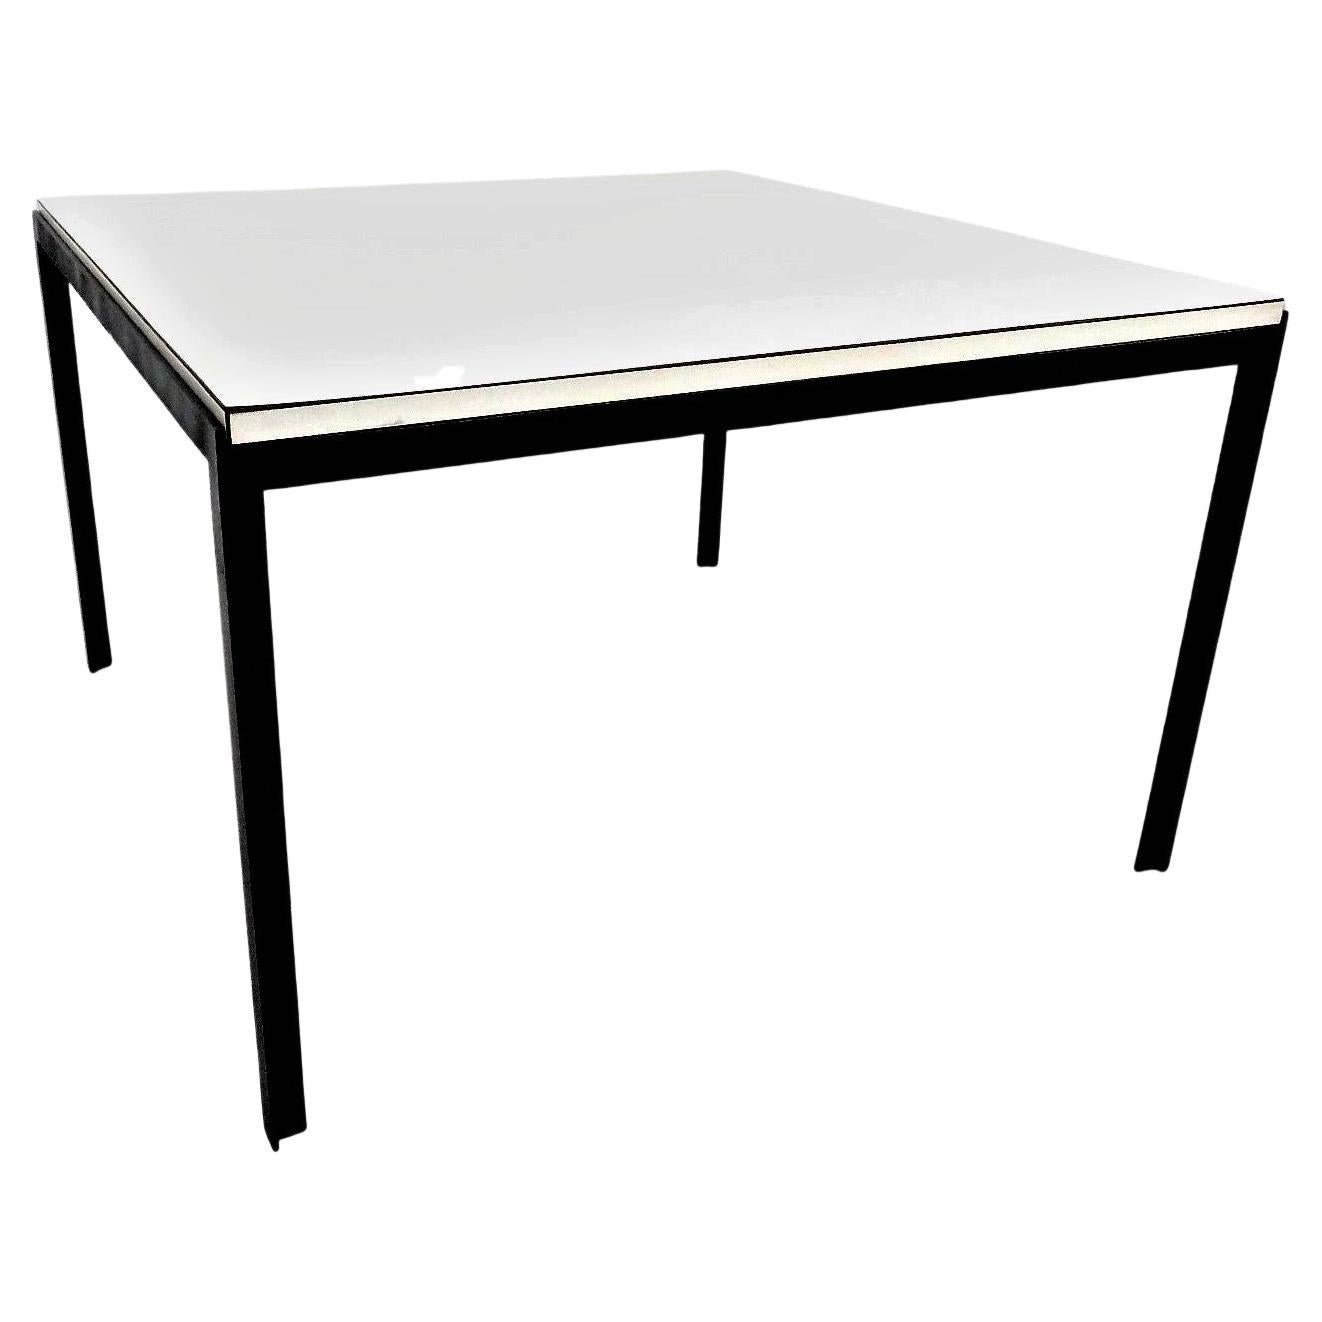 Florence Knoll Modern T-Bar Coffee Table White Mica Top & Black Iron Frame